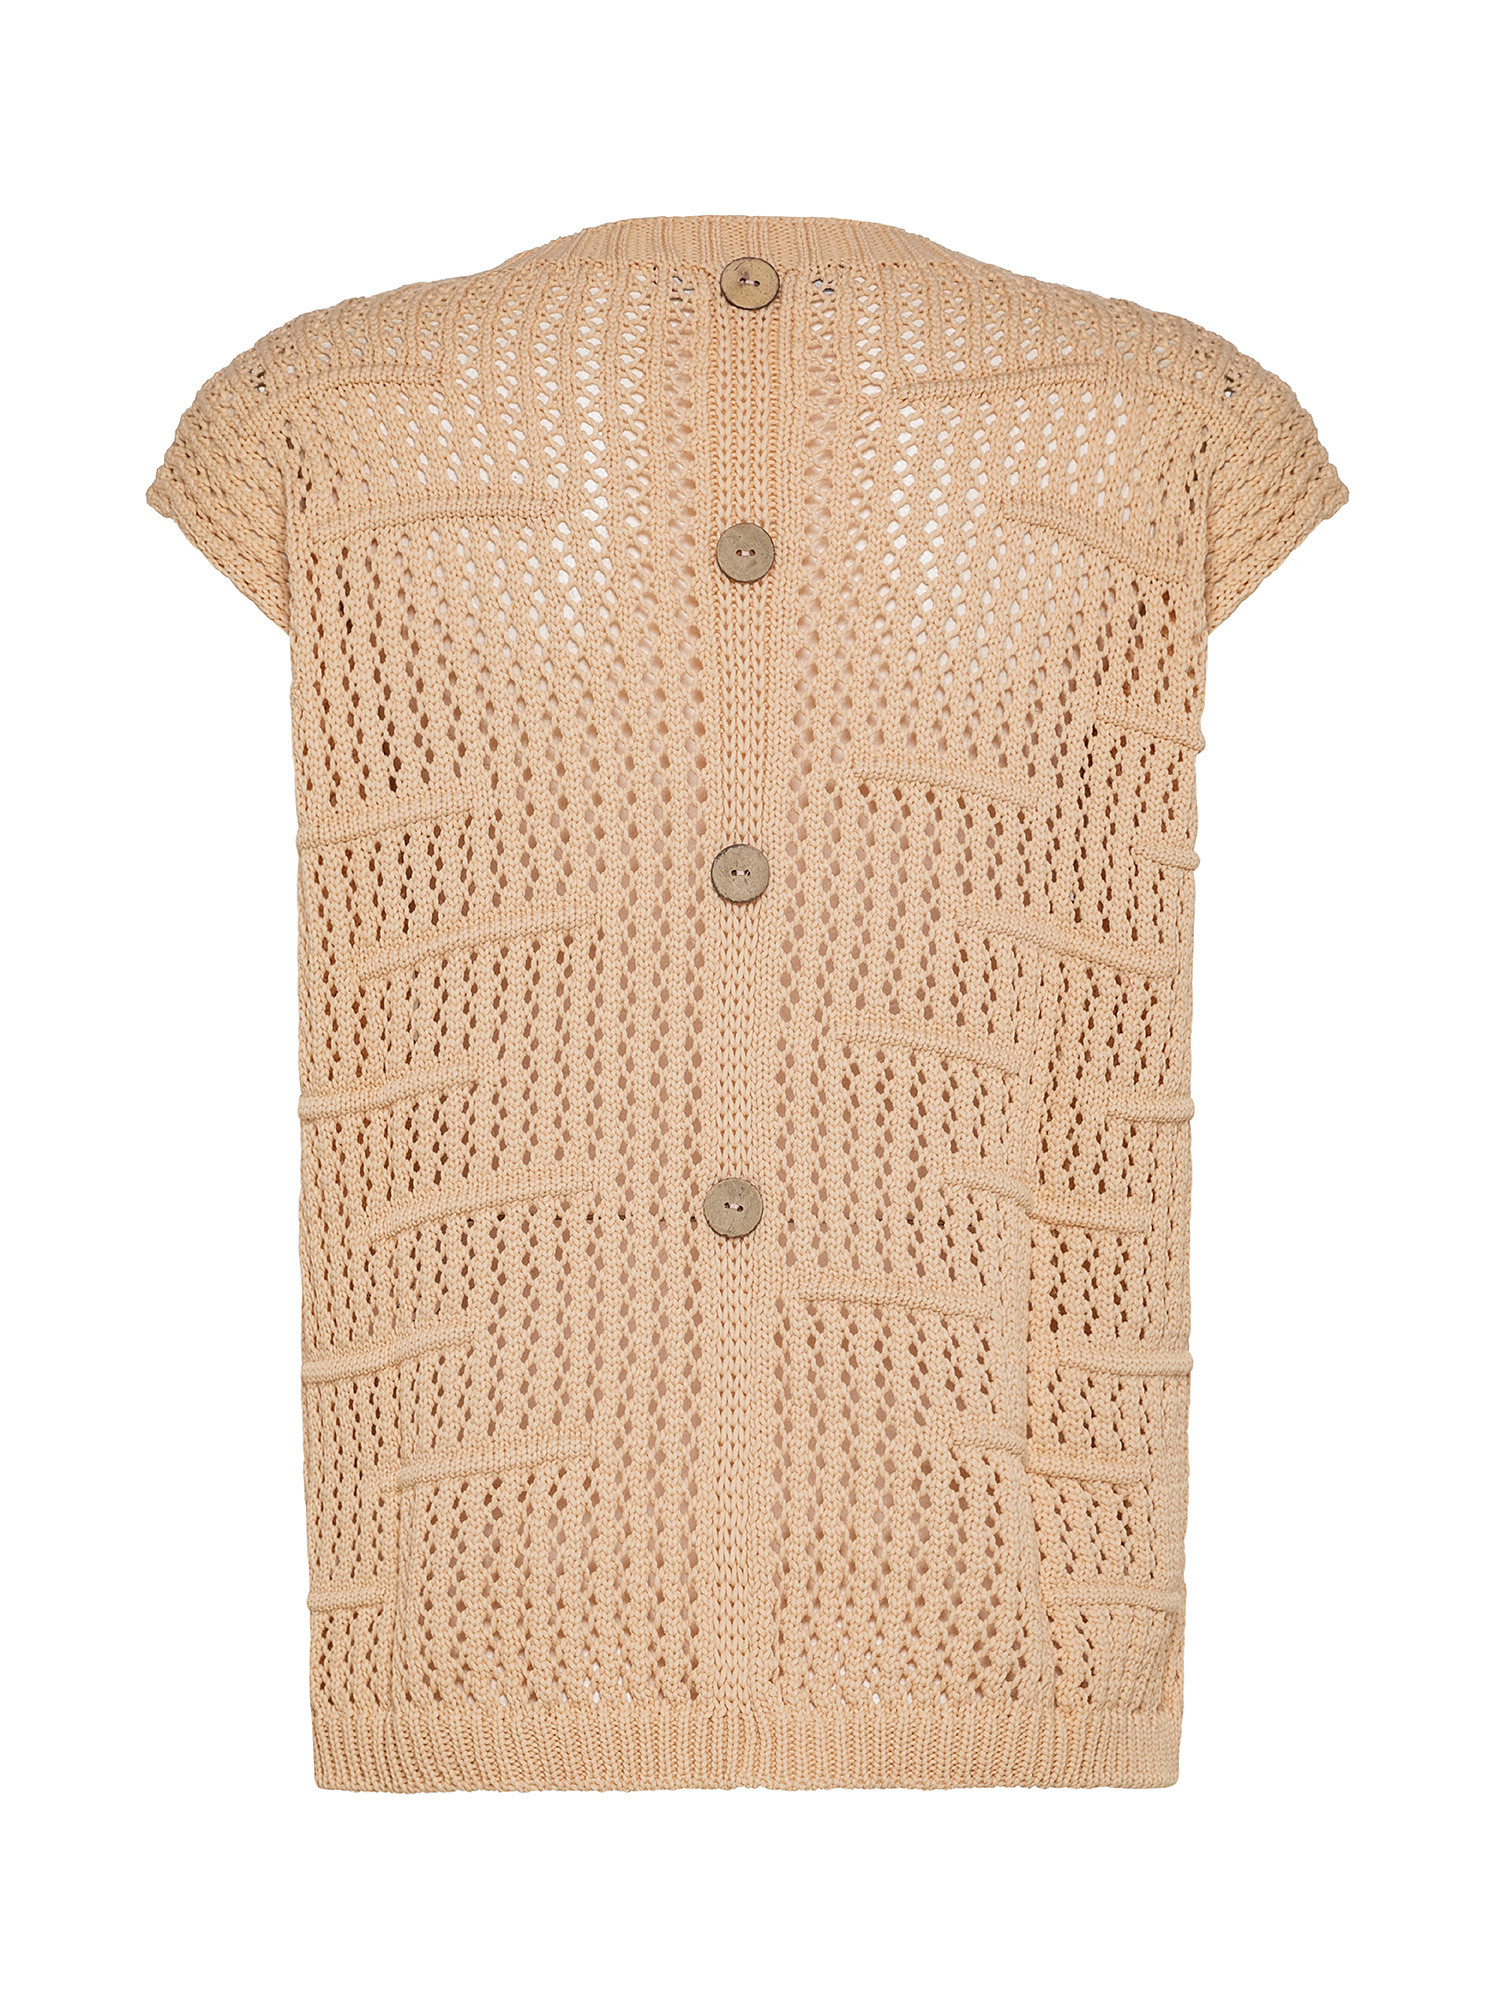 Maglia tricot, Beige, large image number 1